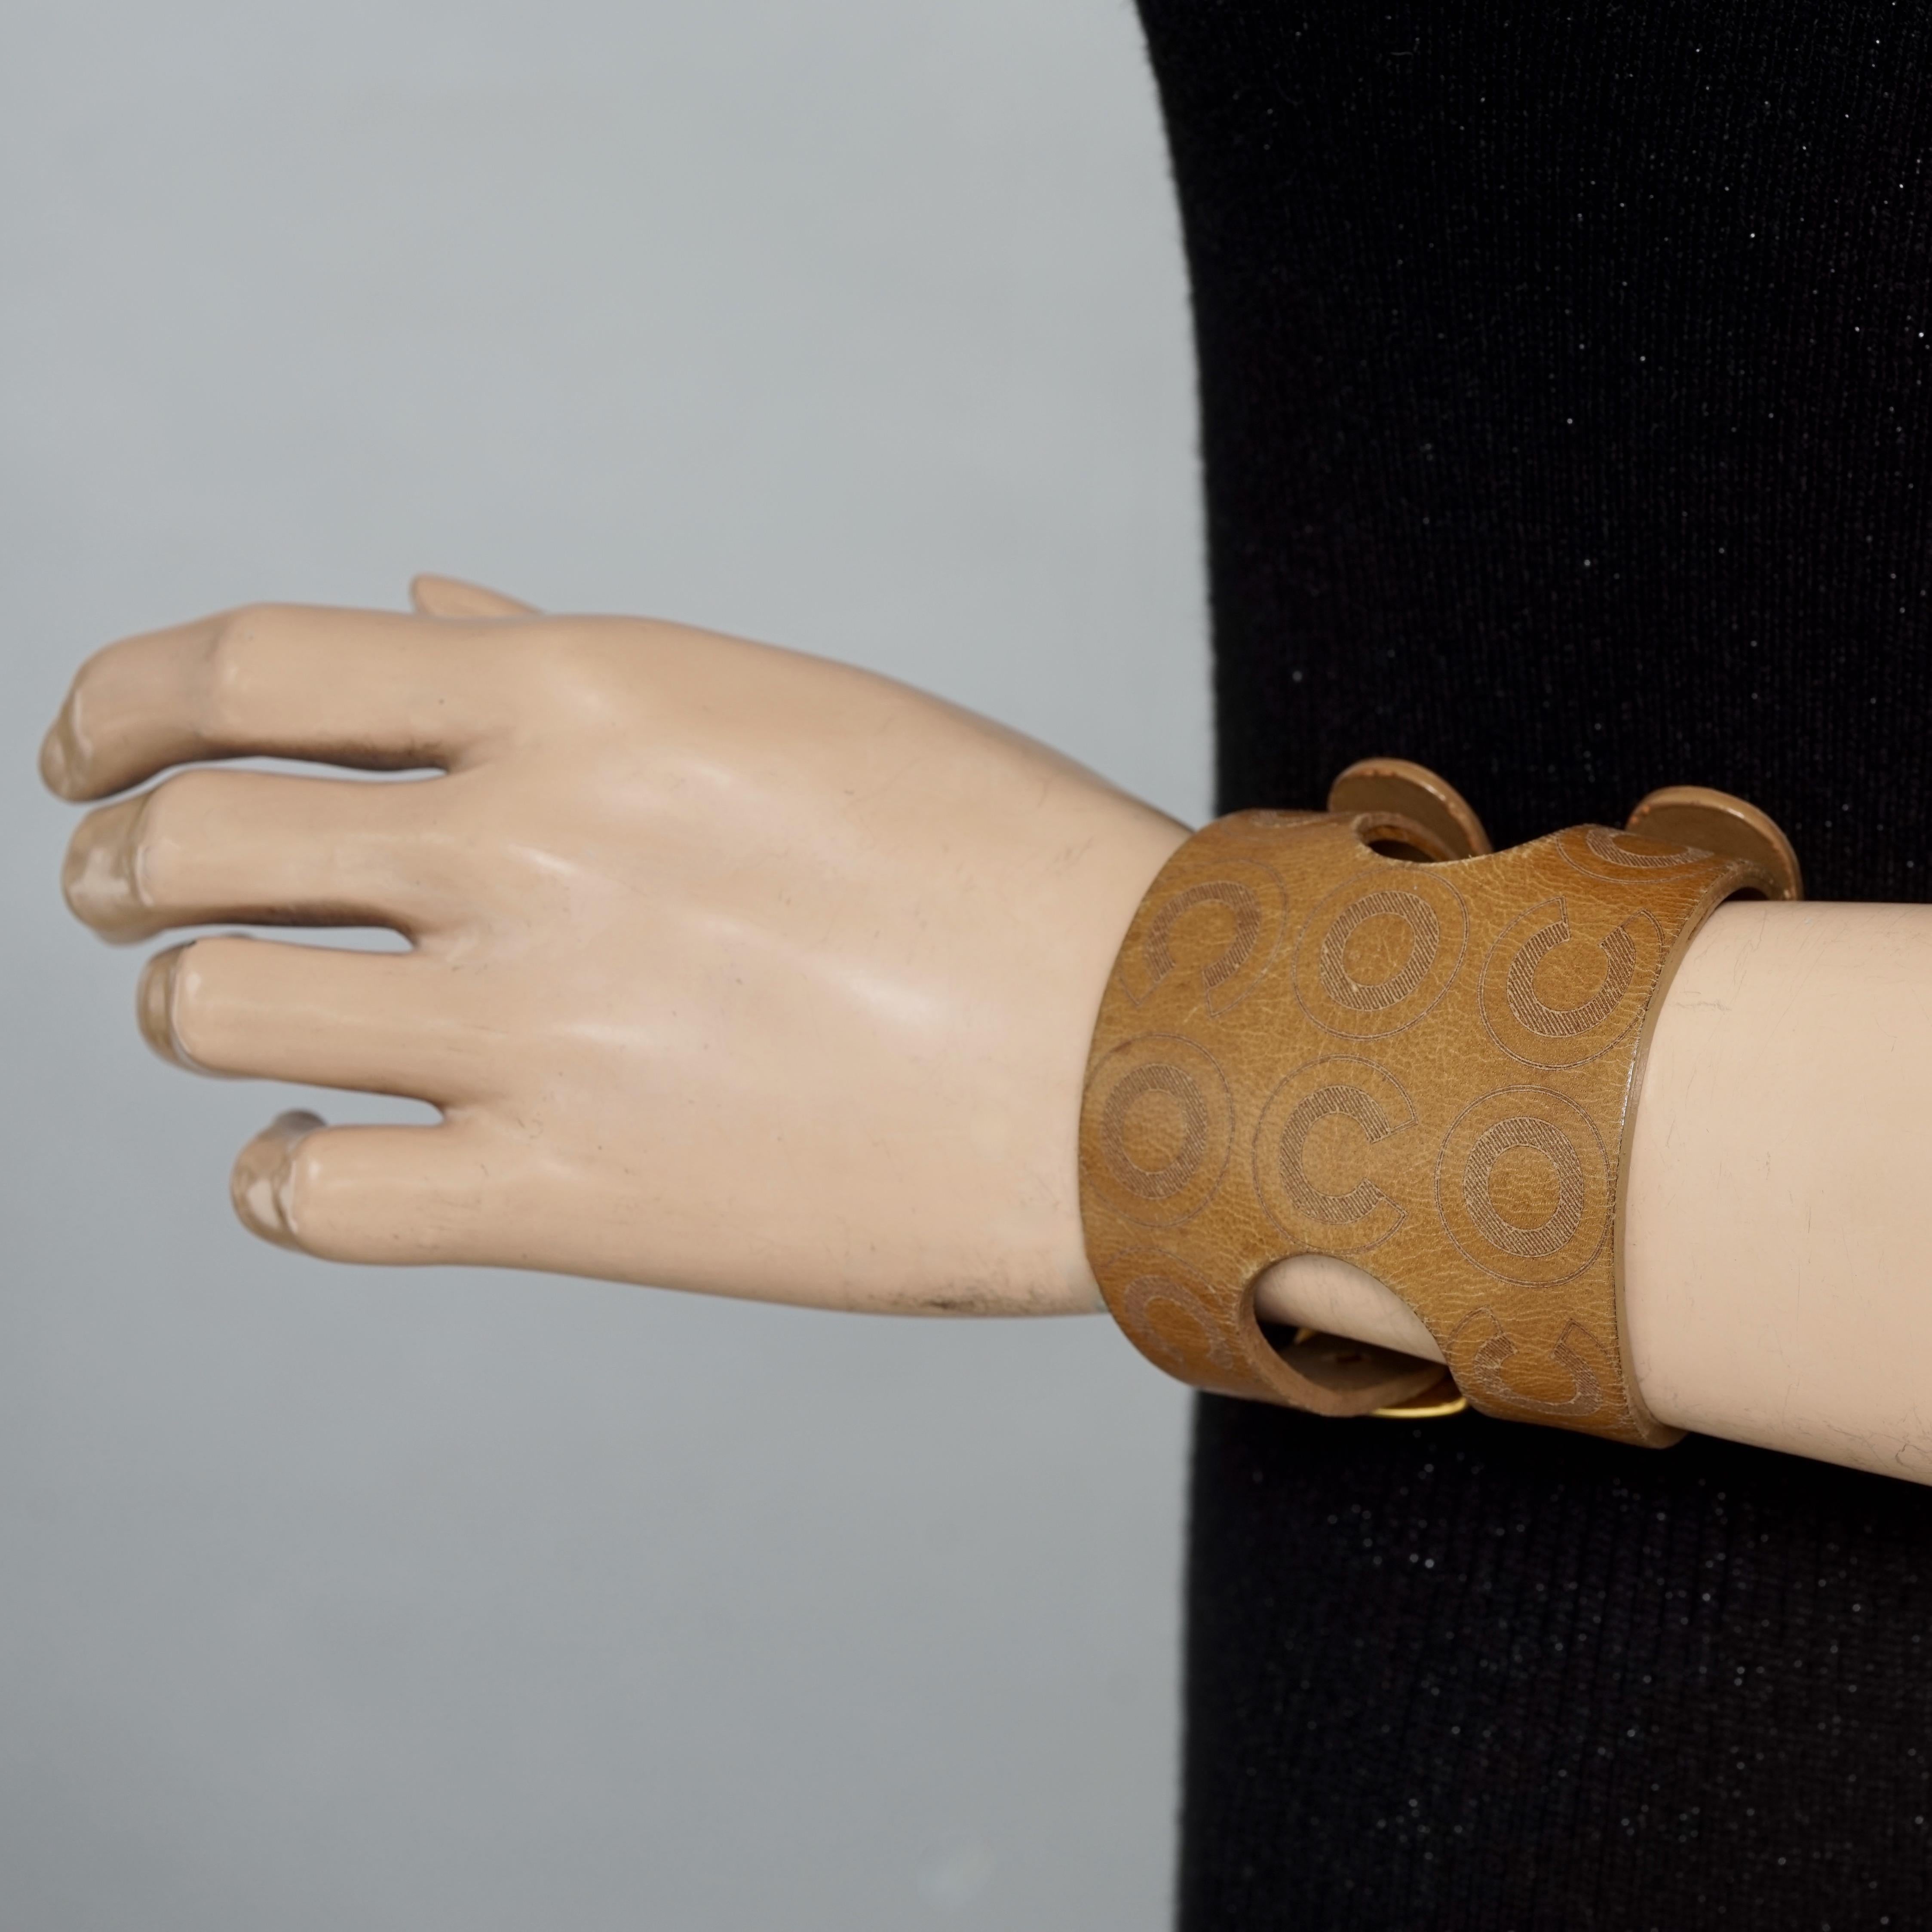 Vintage 2001 COCO CHANEL Double Buckle Brown Leather Cuff Bracelet

Measurements:
Height: 2.55 inches (6.5 cm)
Inside Circumference: 6.30 inches until 8.07 cm (16 cm until 20.5 cm) 

Features:
- 100% Authentic CHANEL.
- Wide brown leather with